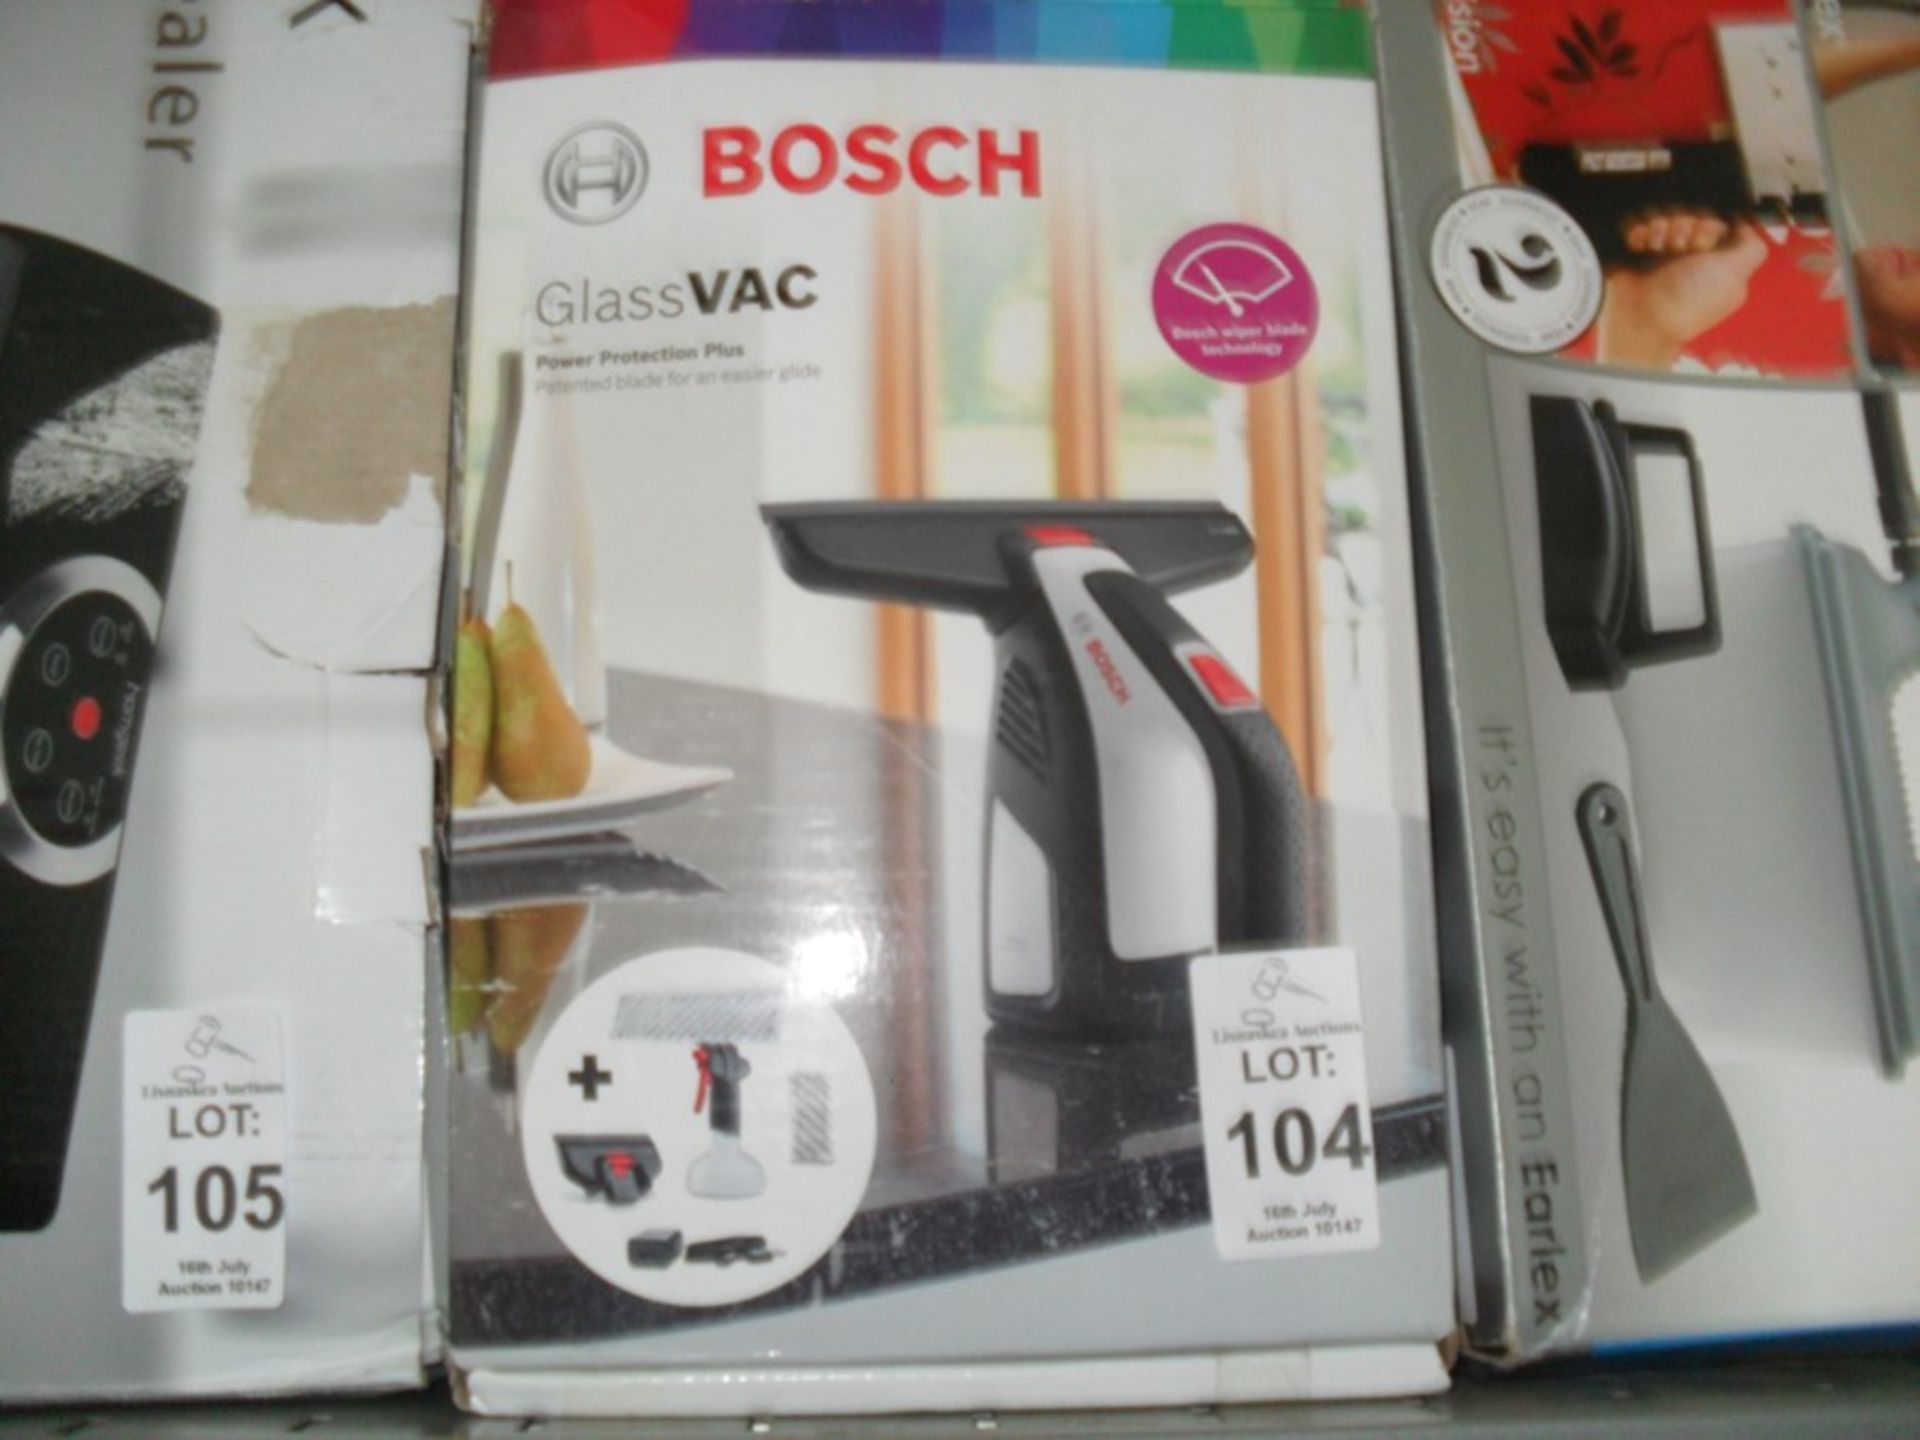 BOXED BOSCH GLASS VAC (WORKING)